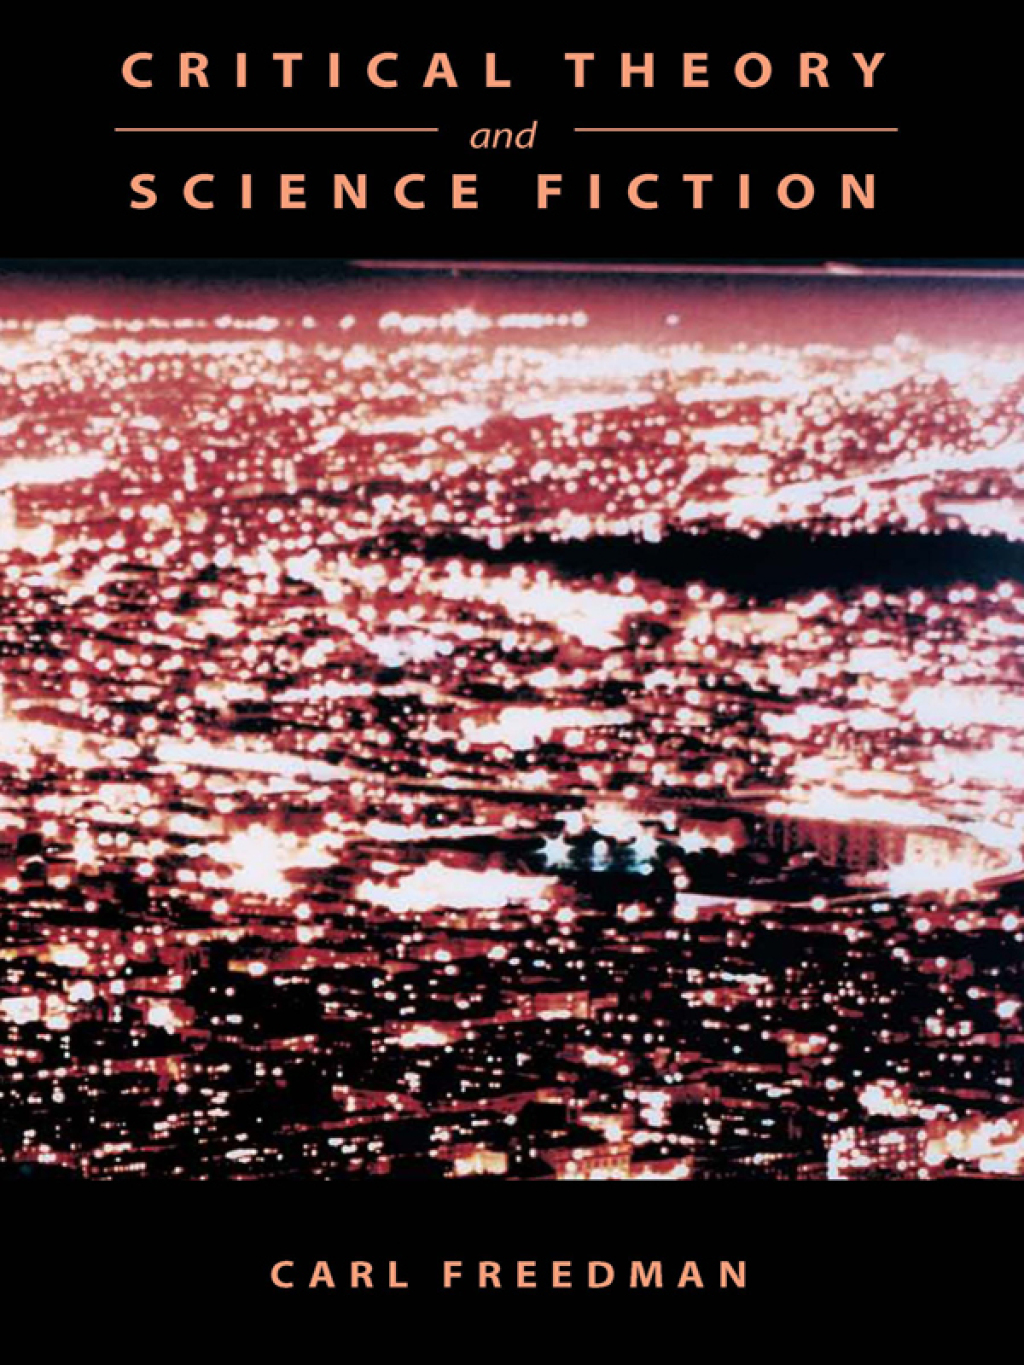 Critical Theory and Science Fiction (eBook) - Carl Freedman,